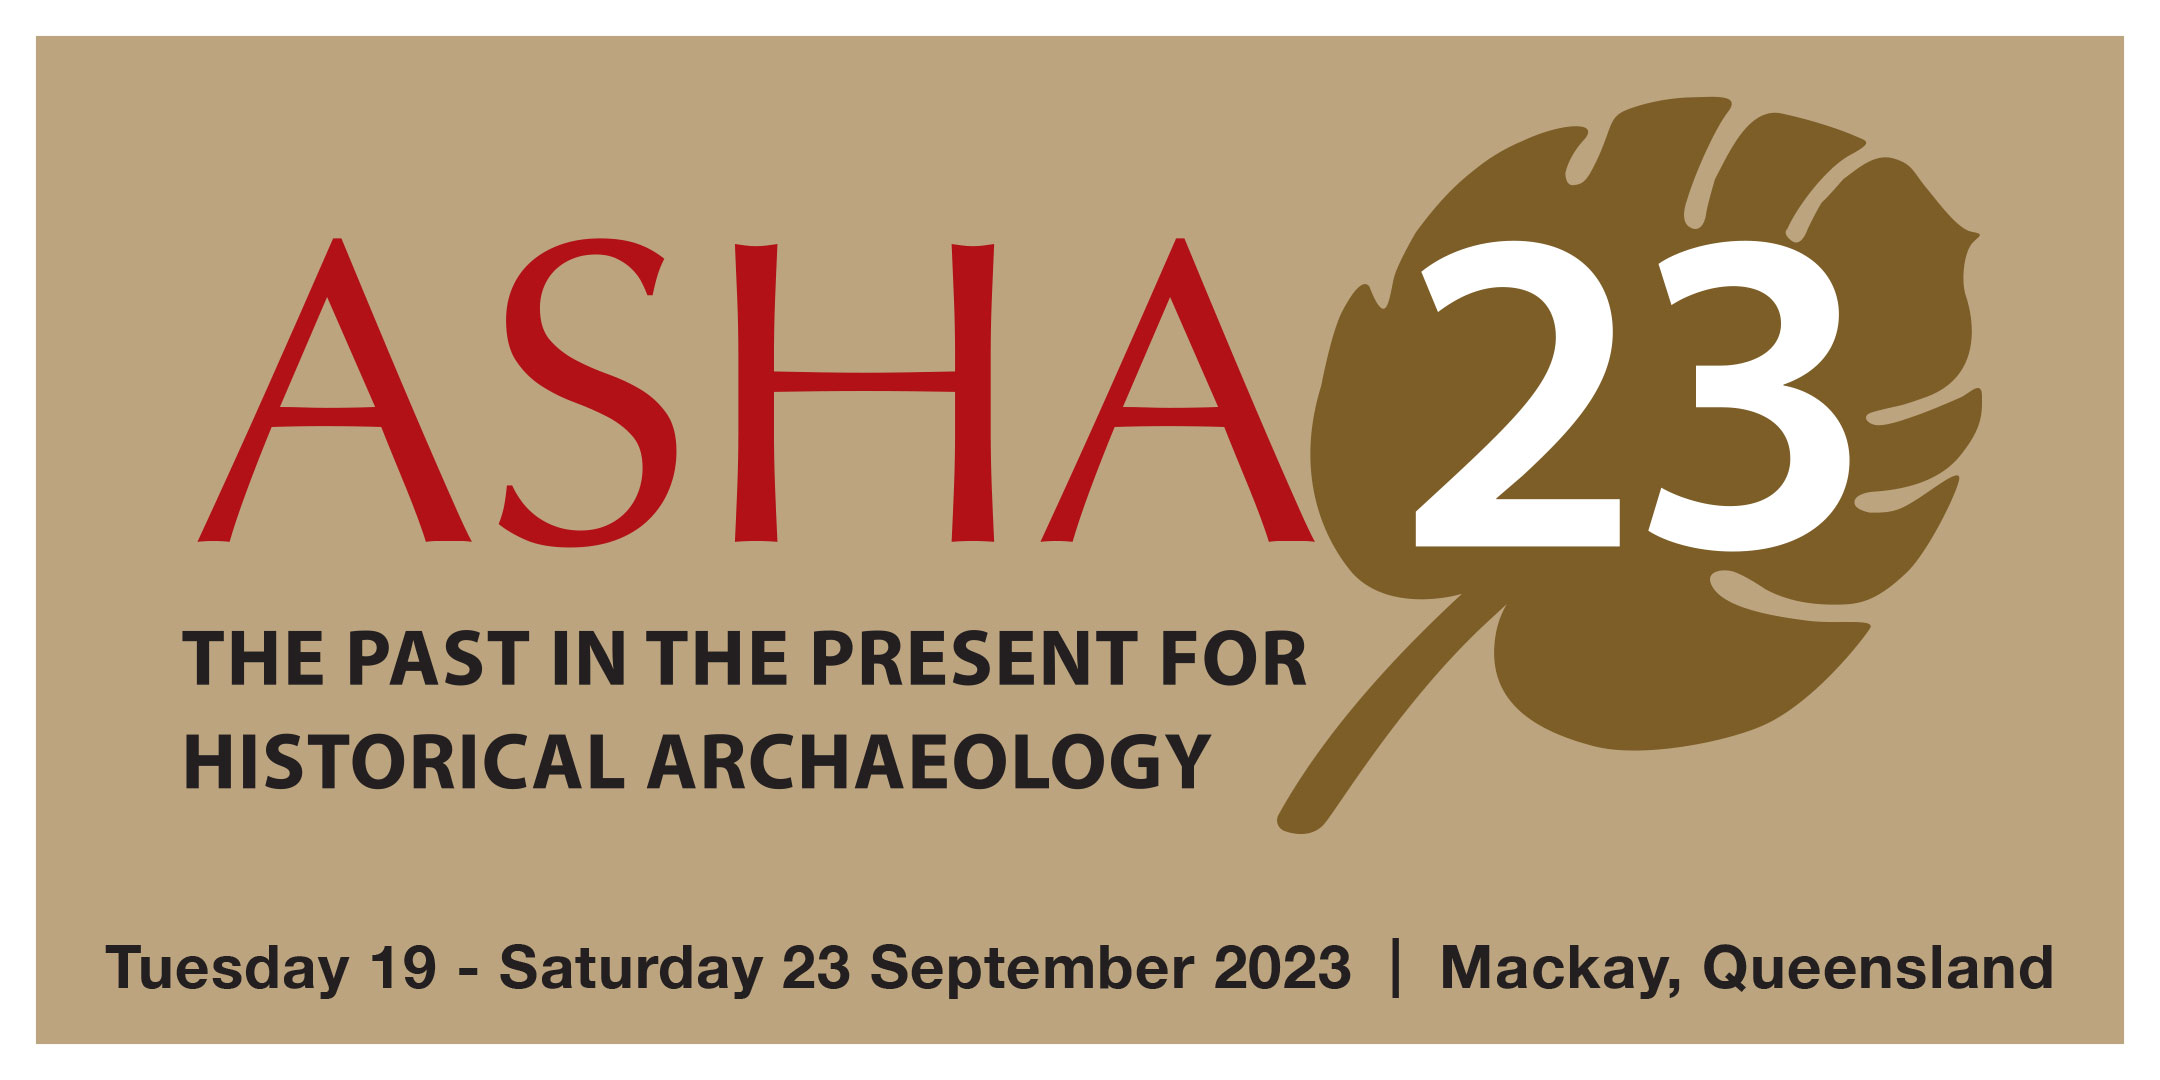 ASHA 2023 Conference logo - the past in the present for historical archaeology